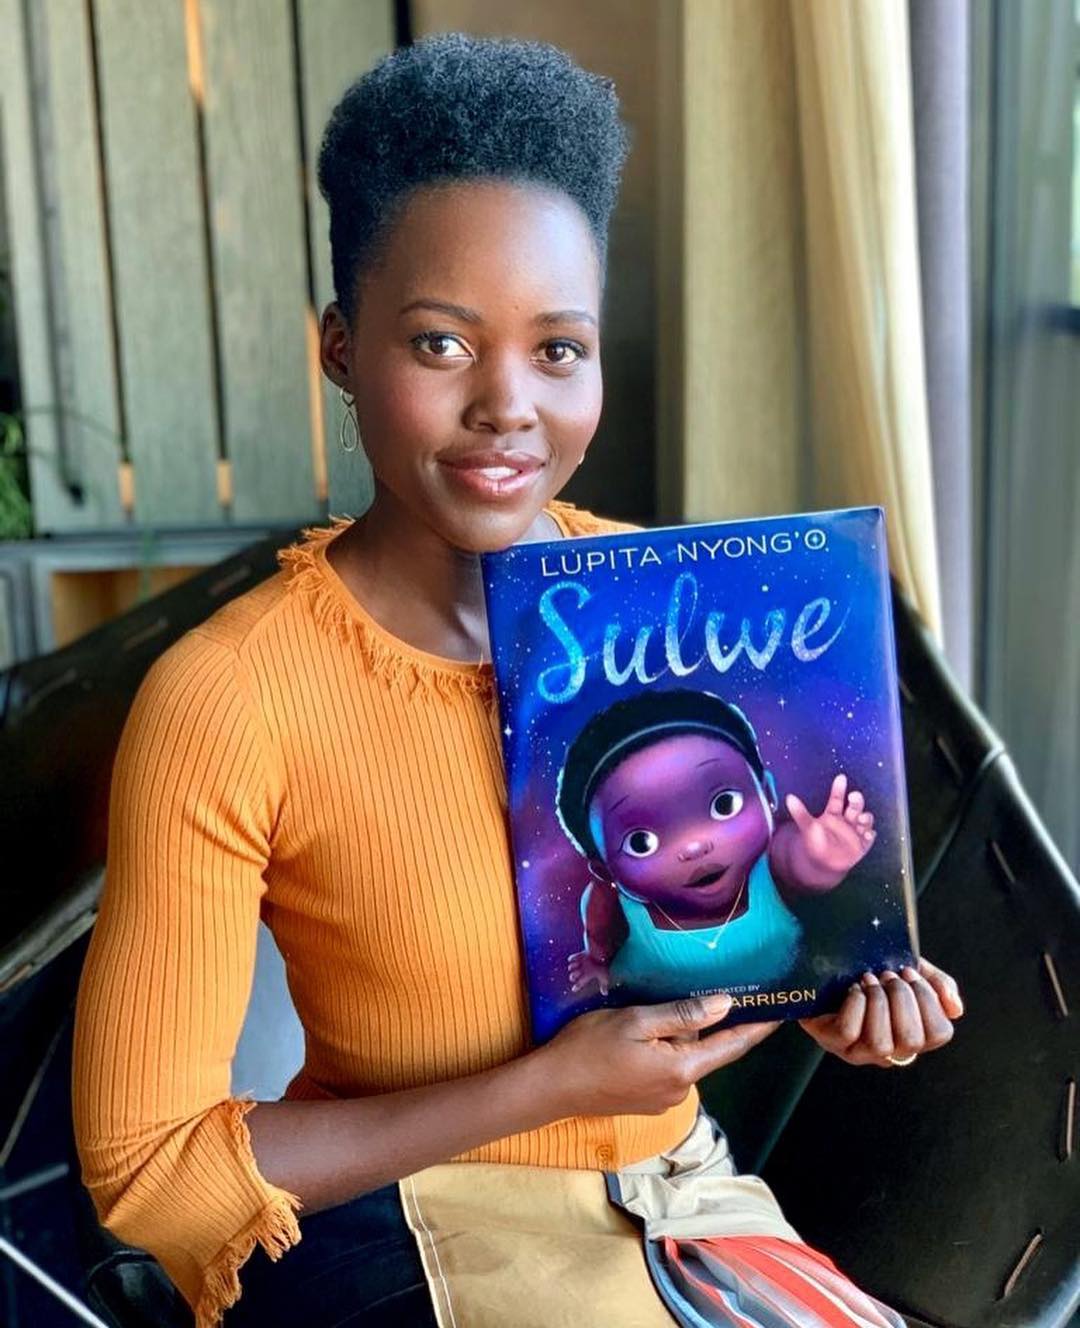 Lupita Nyong'o's 'Sulwe' Is Being Turned Into A Film